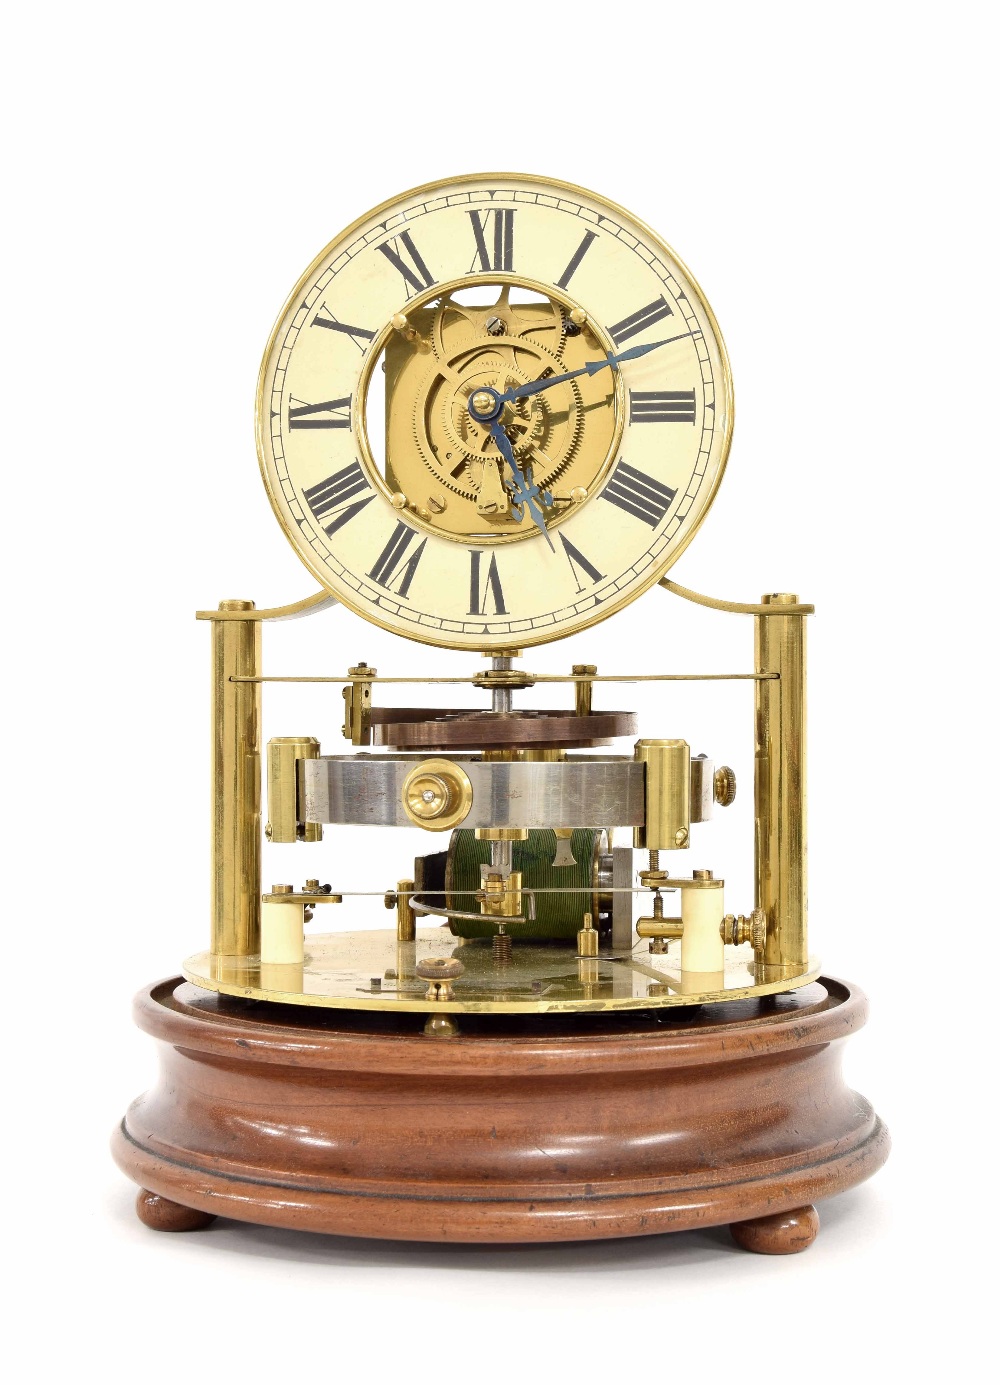 Good rare electric mantel clock by and inscribed Electric Clock Made by the Reason MFG Co. Ltd, - Image 4 of 4